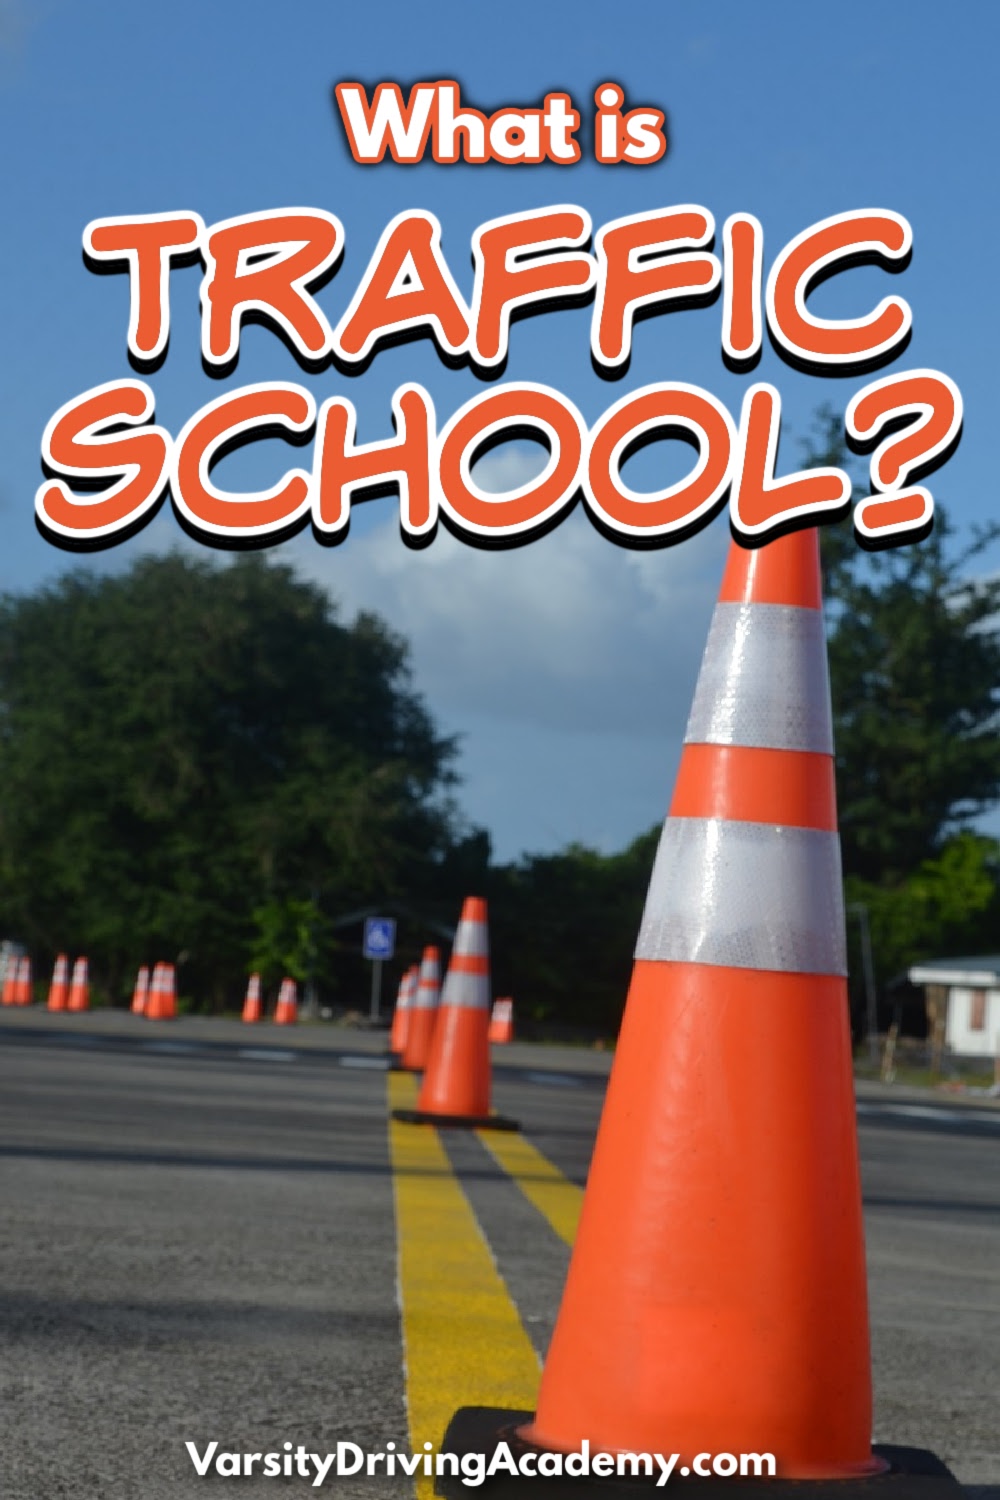 Finding out what traffic school is and how it can help you in specific situations is important, but the goal is to avoid the need altogether.